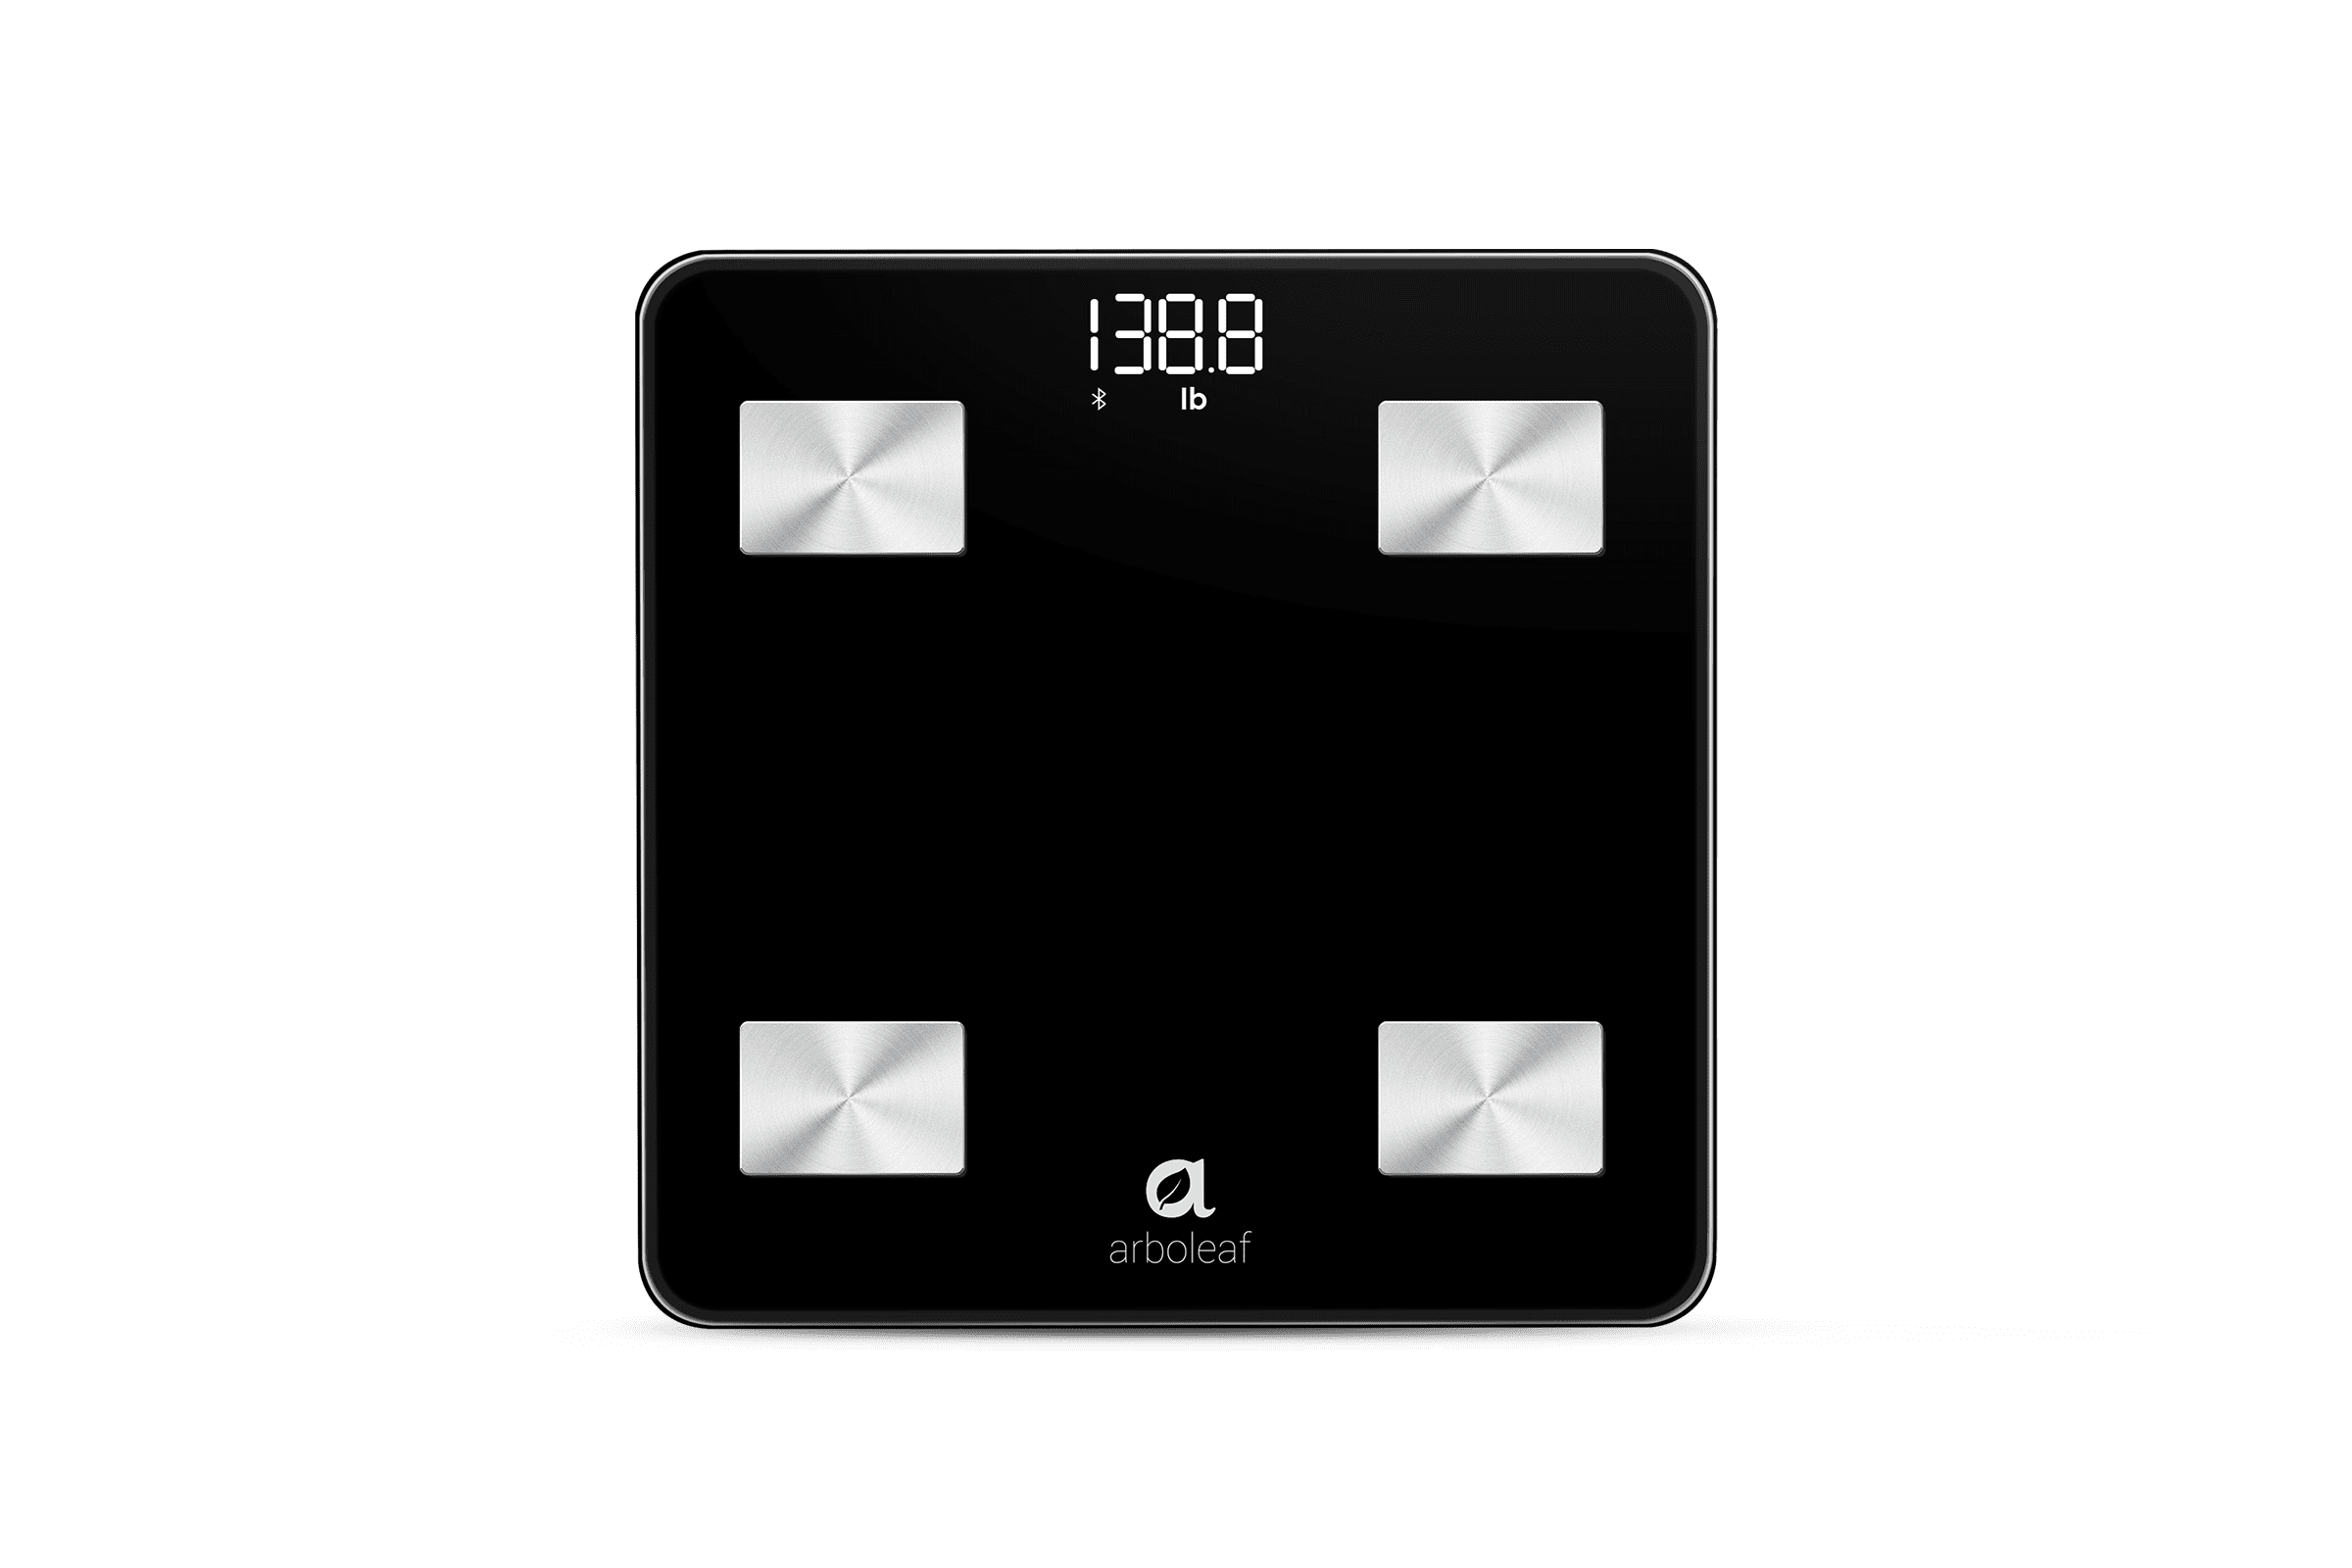 Dropship 5 Core Smart Digital Bathroom Weighing Scale With Body Fat And  Water Weight For People; Bluetooth BMI Electronic Body Analyzer Machine;  400 Lbs. BBS HL B BLK to Sell Online at